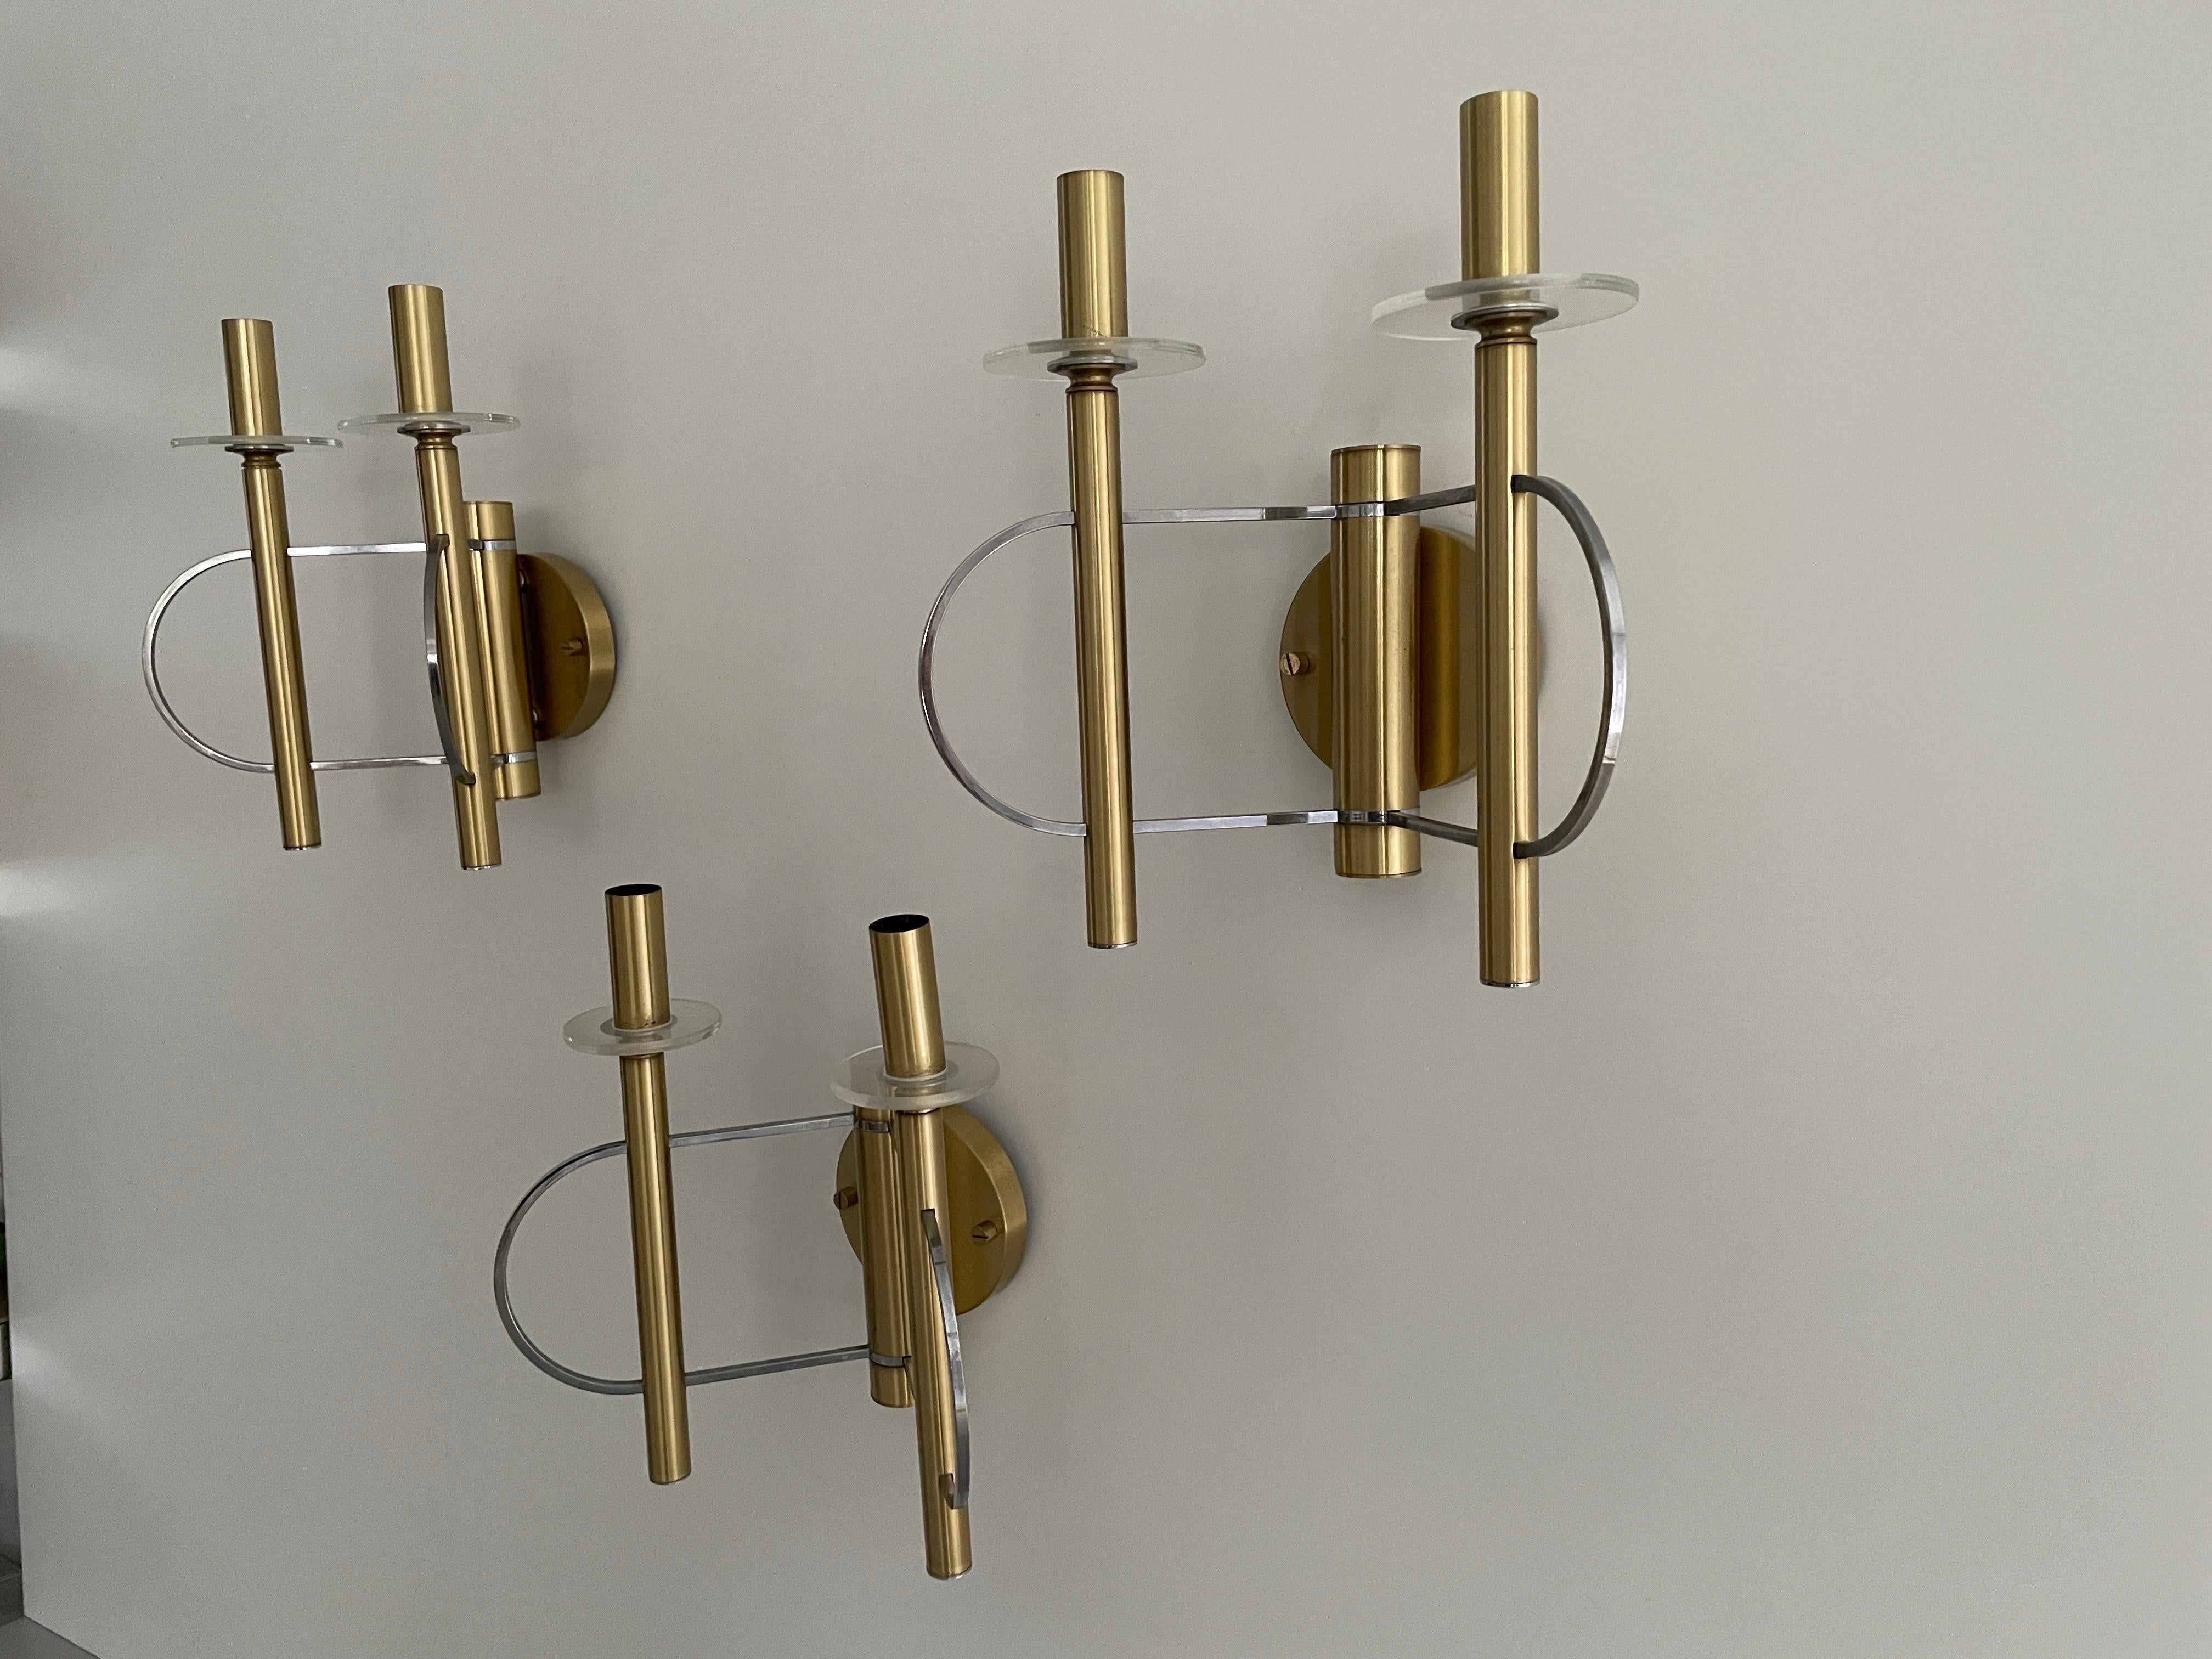 Italian Mid-century Modern Twin-shade Set of 3 Sconces by Sciolari, 1960s, Italy For Sale